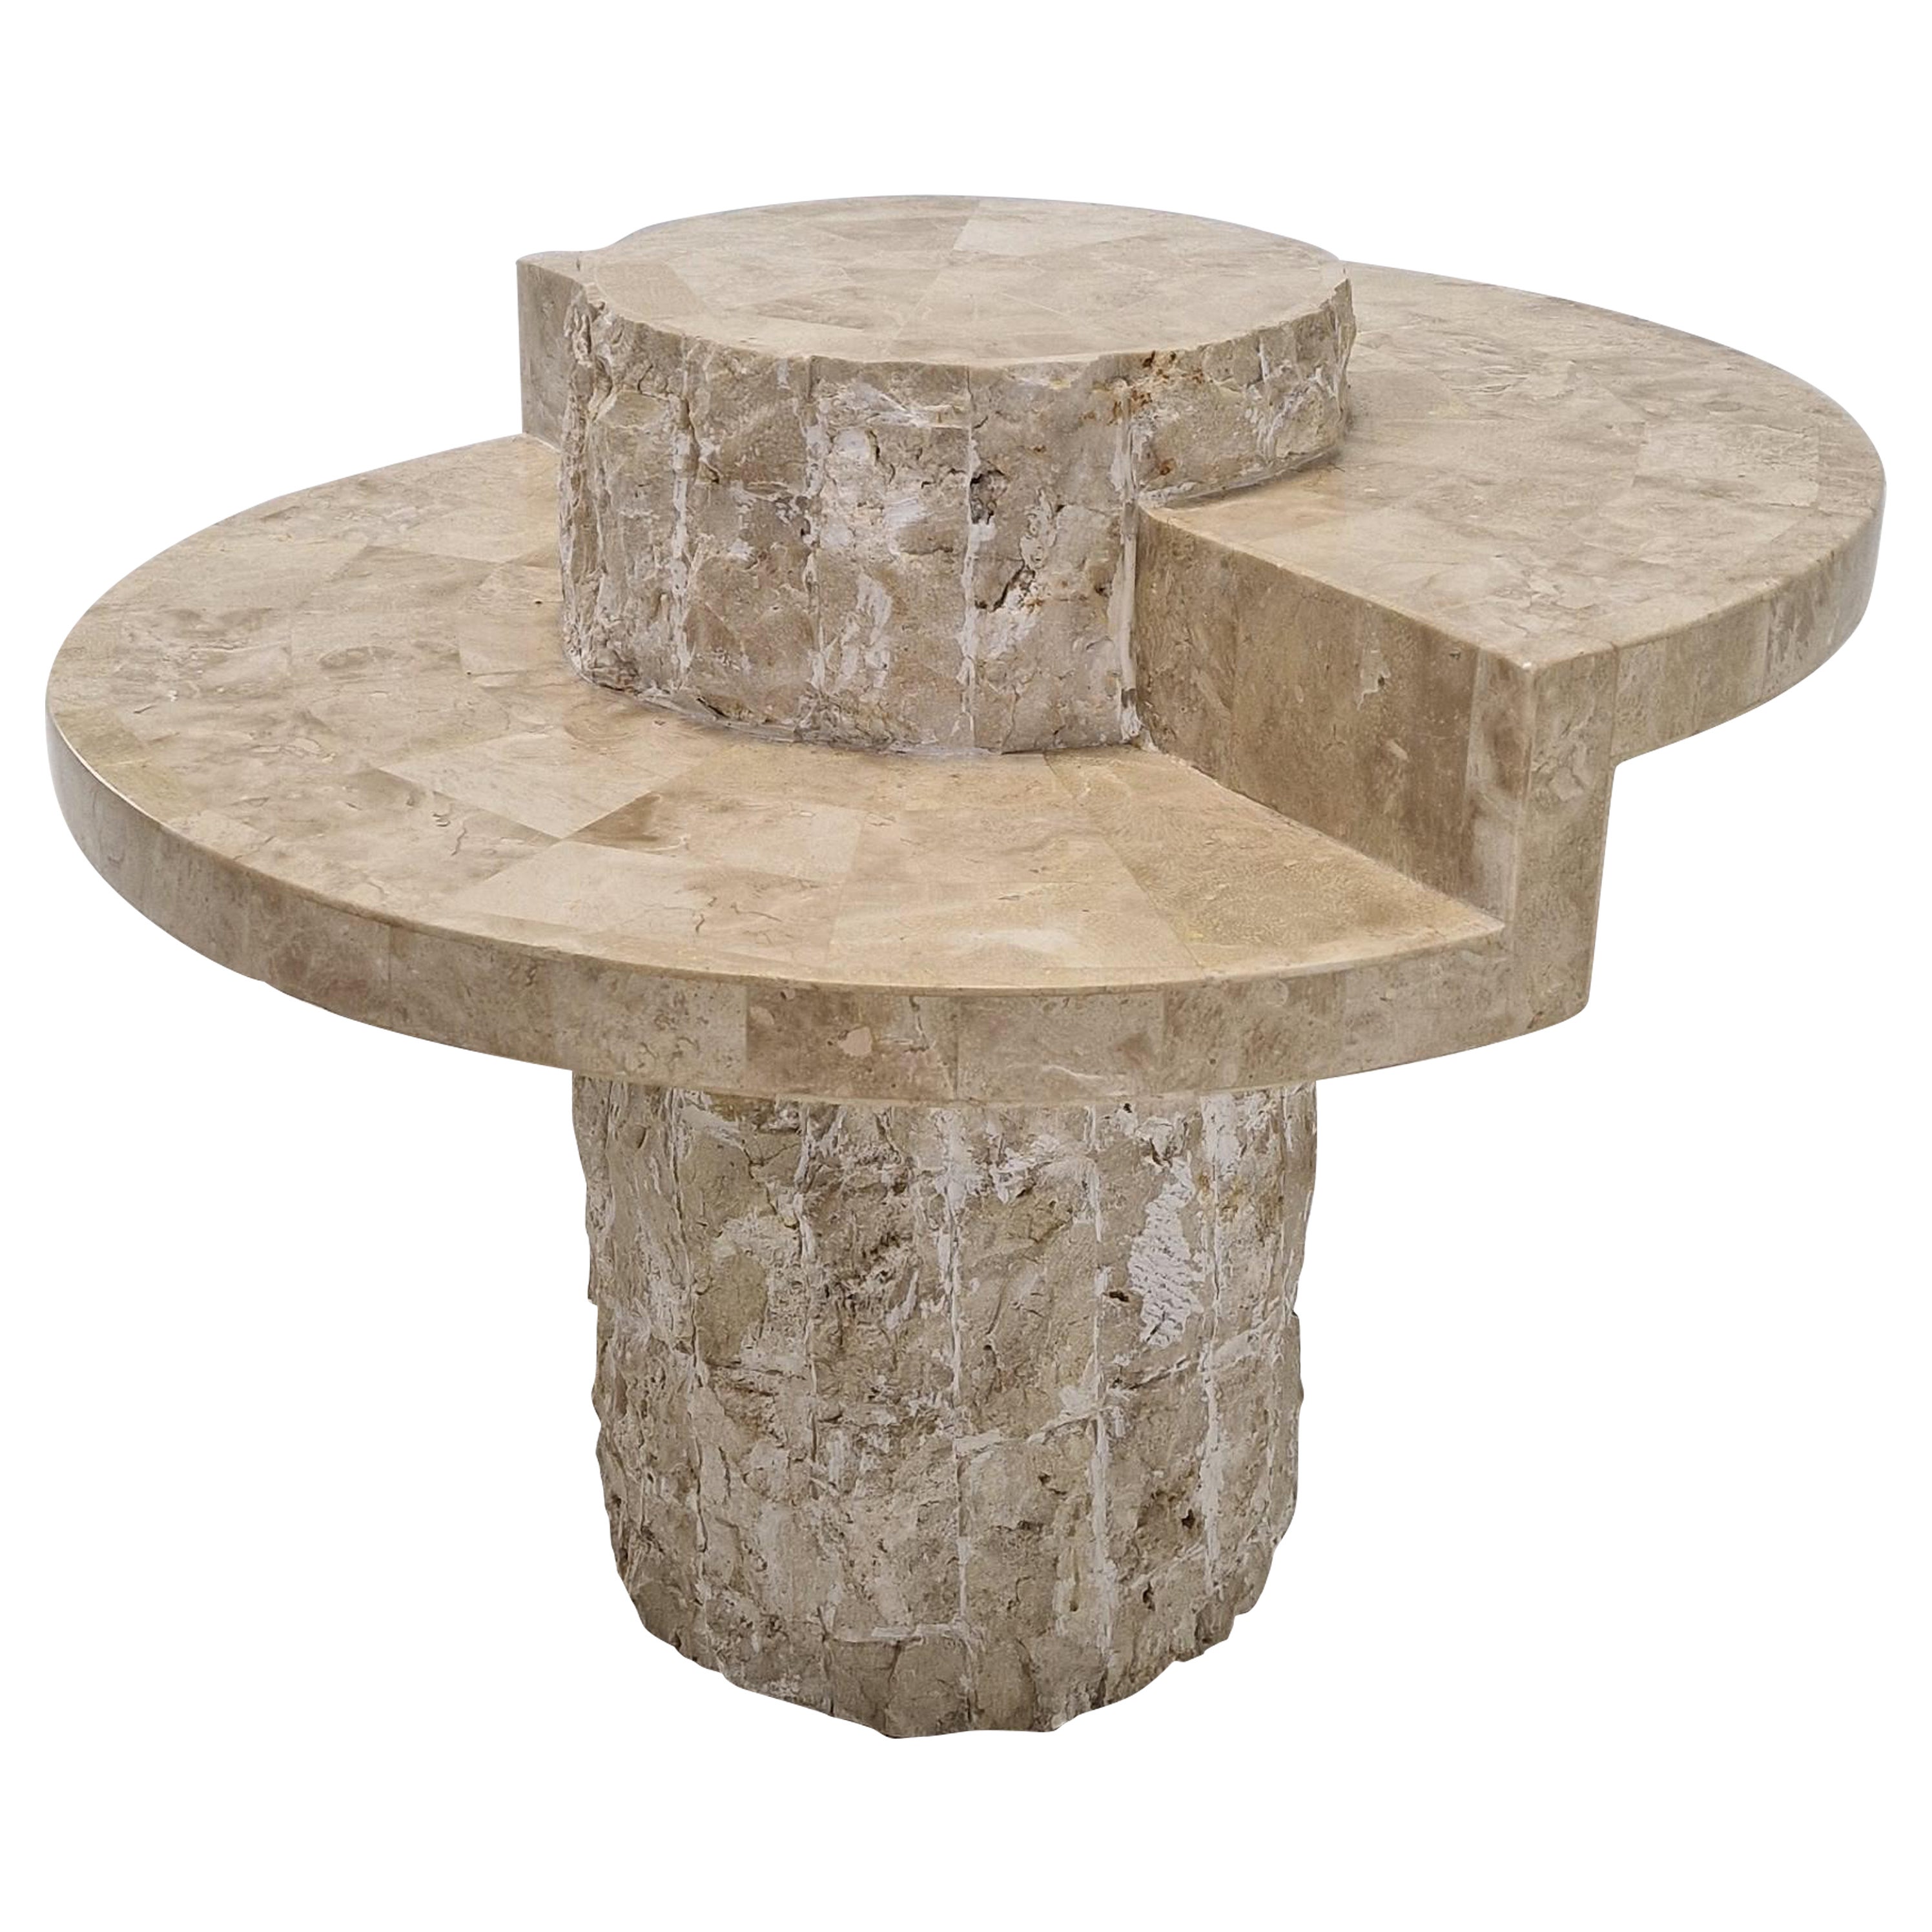 Mactan or Fossil Stone Coffee Table by Magnussen Ponte, 1980s For Sale